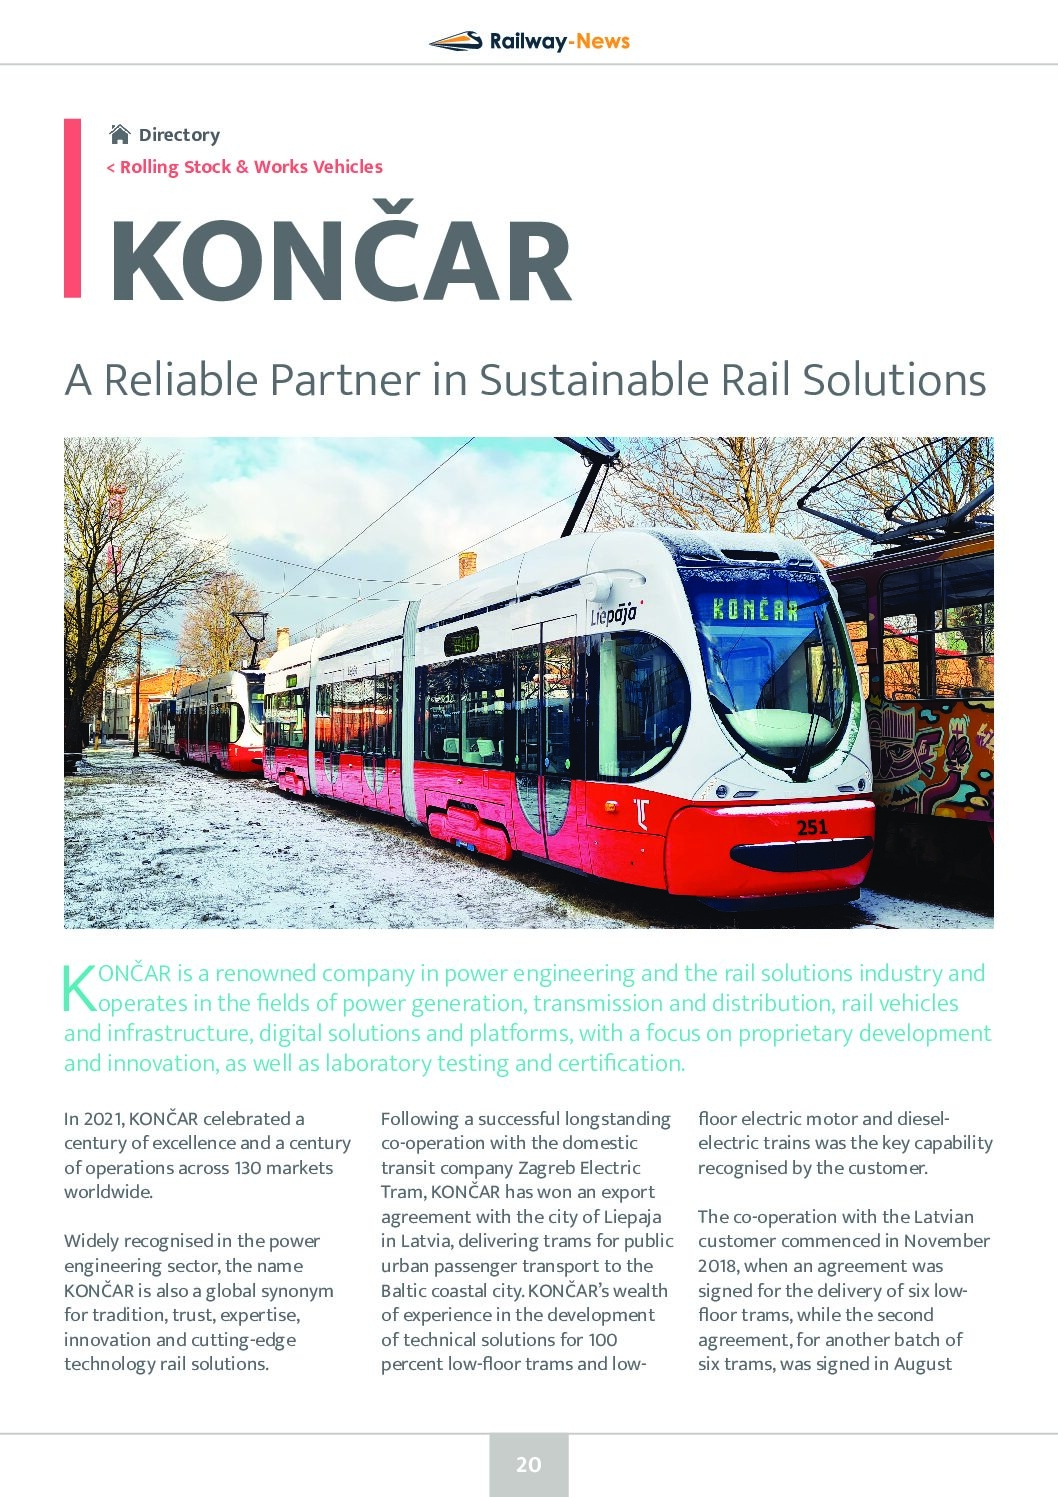 A Reliable Partner in Sustainable Rail Solutions